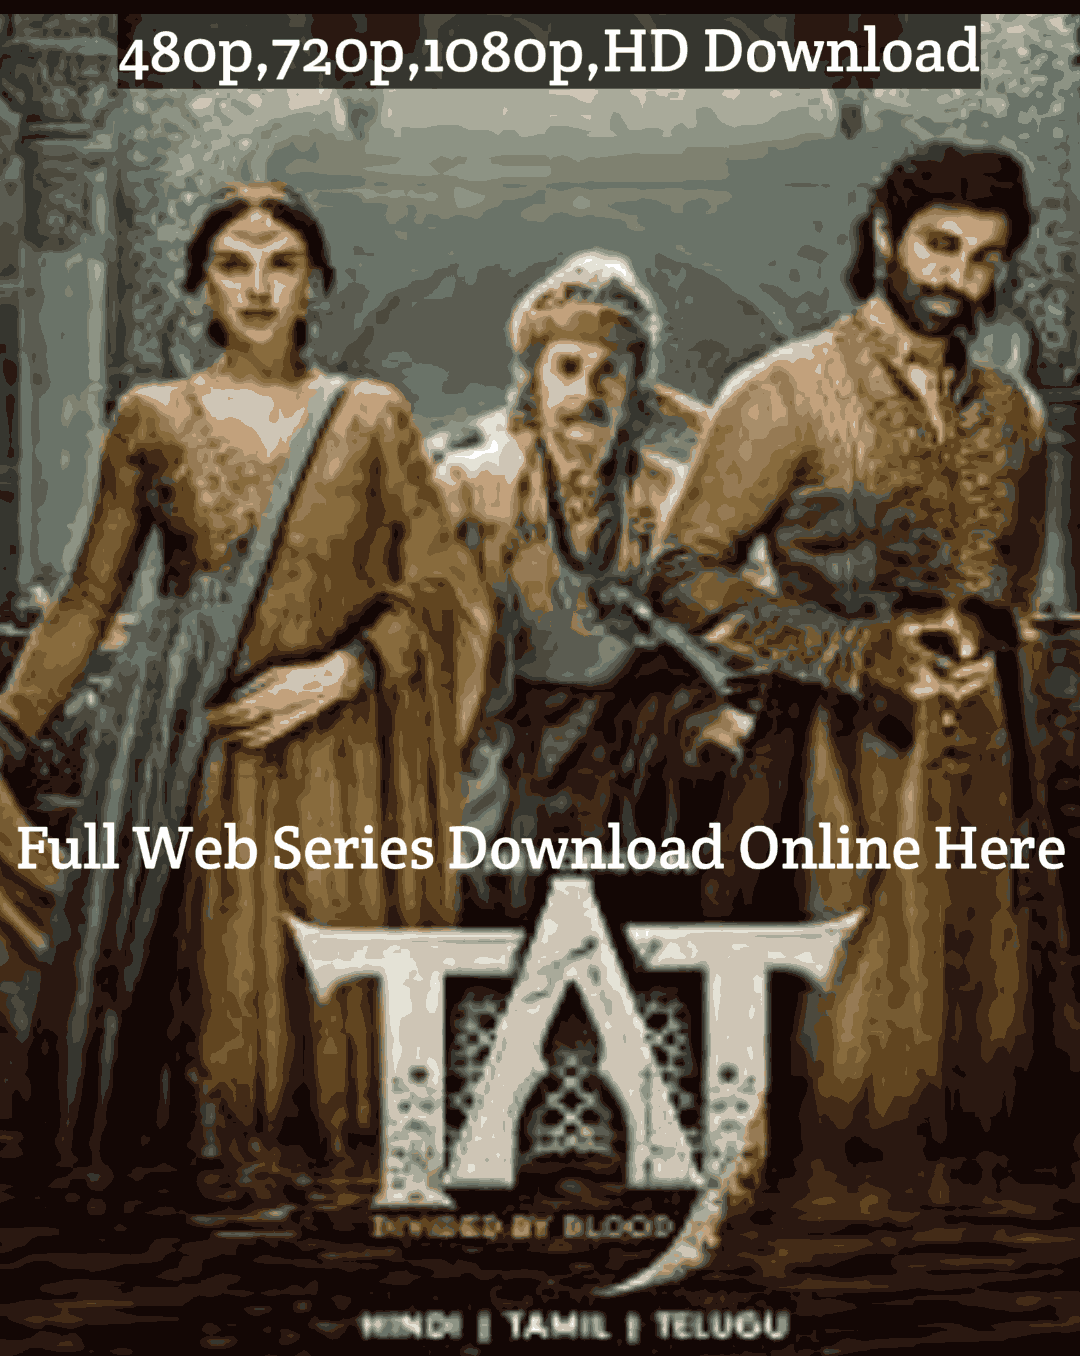 Taj Divided by Blood Hindi Web Series Full Episodes ZEE5 Download Leaked Online Free HD [480p, 720p, 1080p]